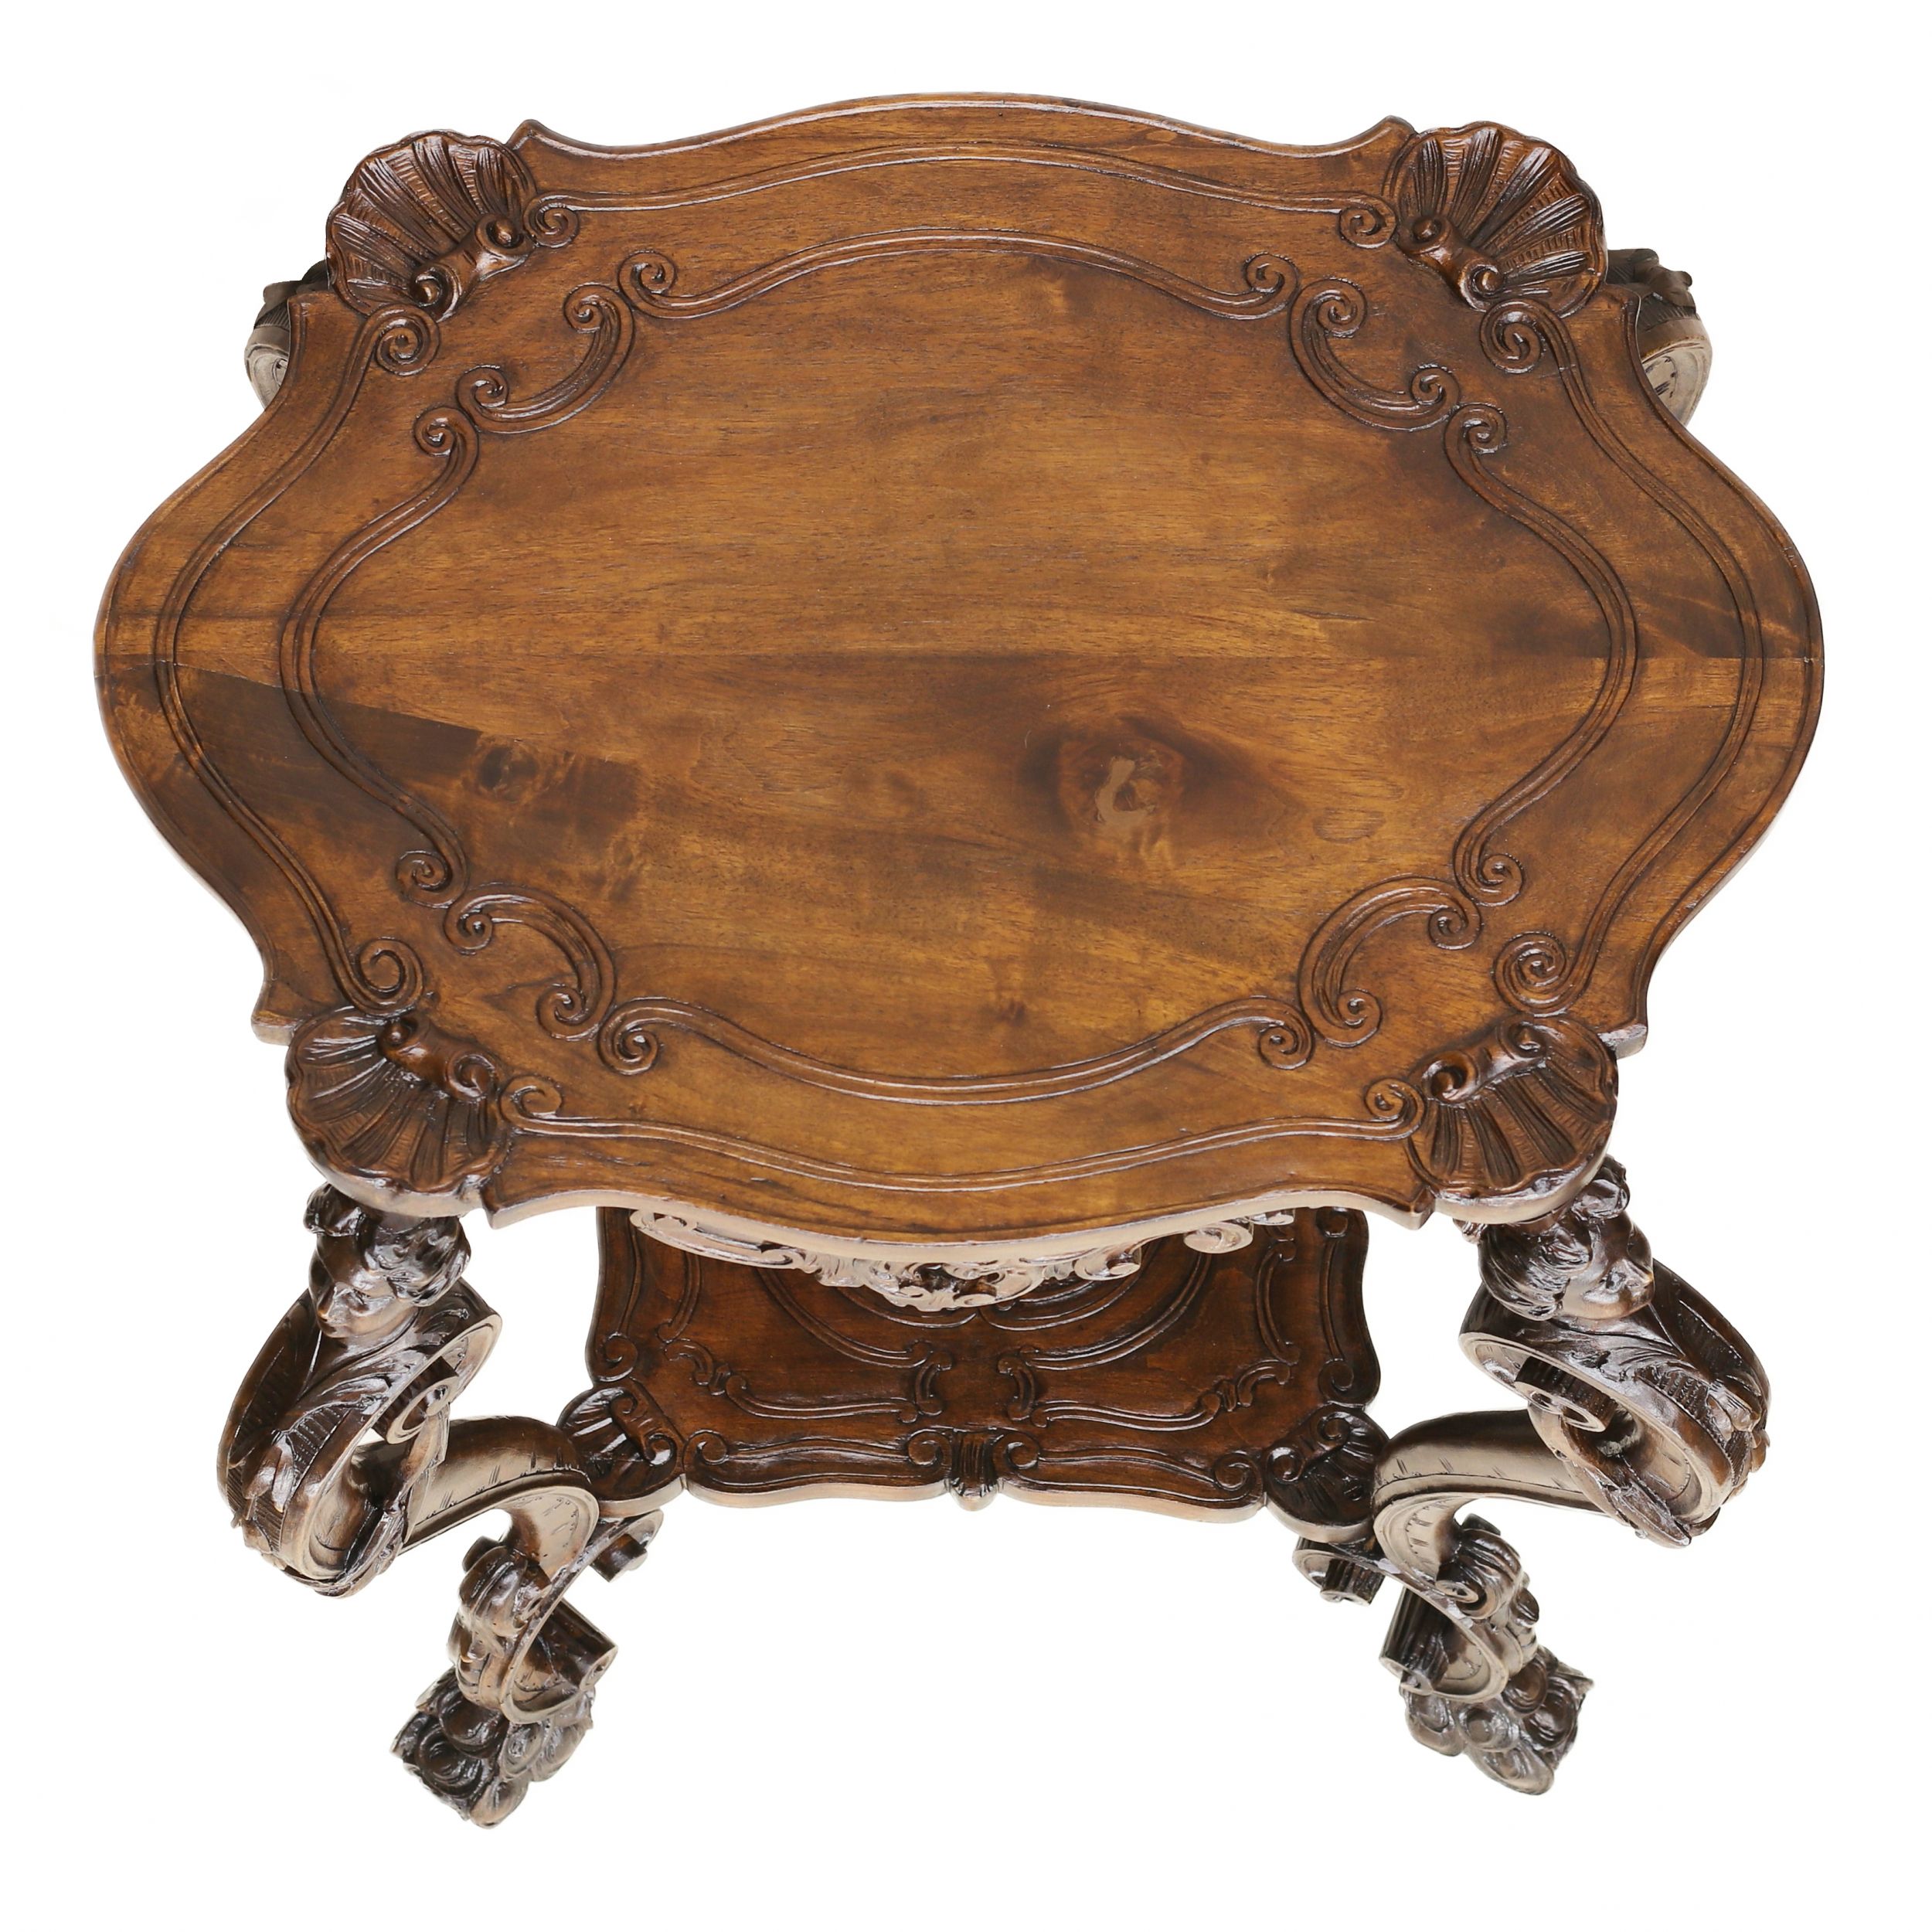 Carved wooden table in neo-Rococo style from the turn of the 19th century. - Image 5 of 7